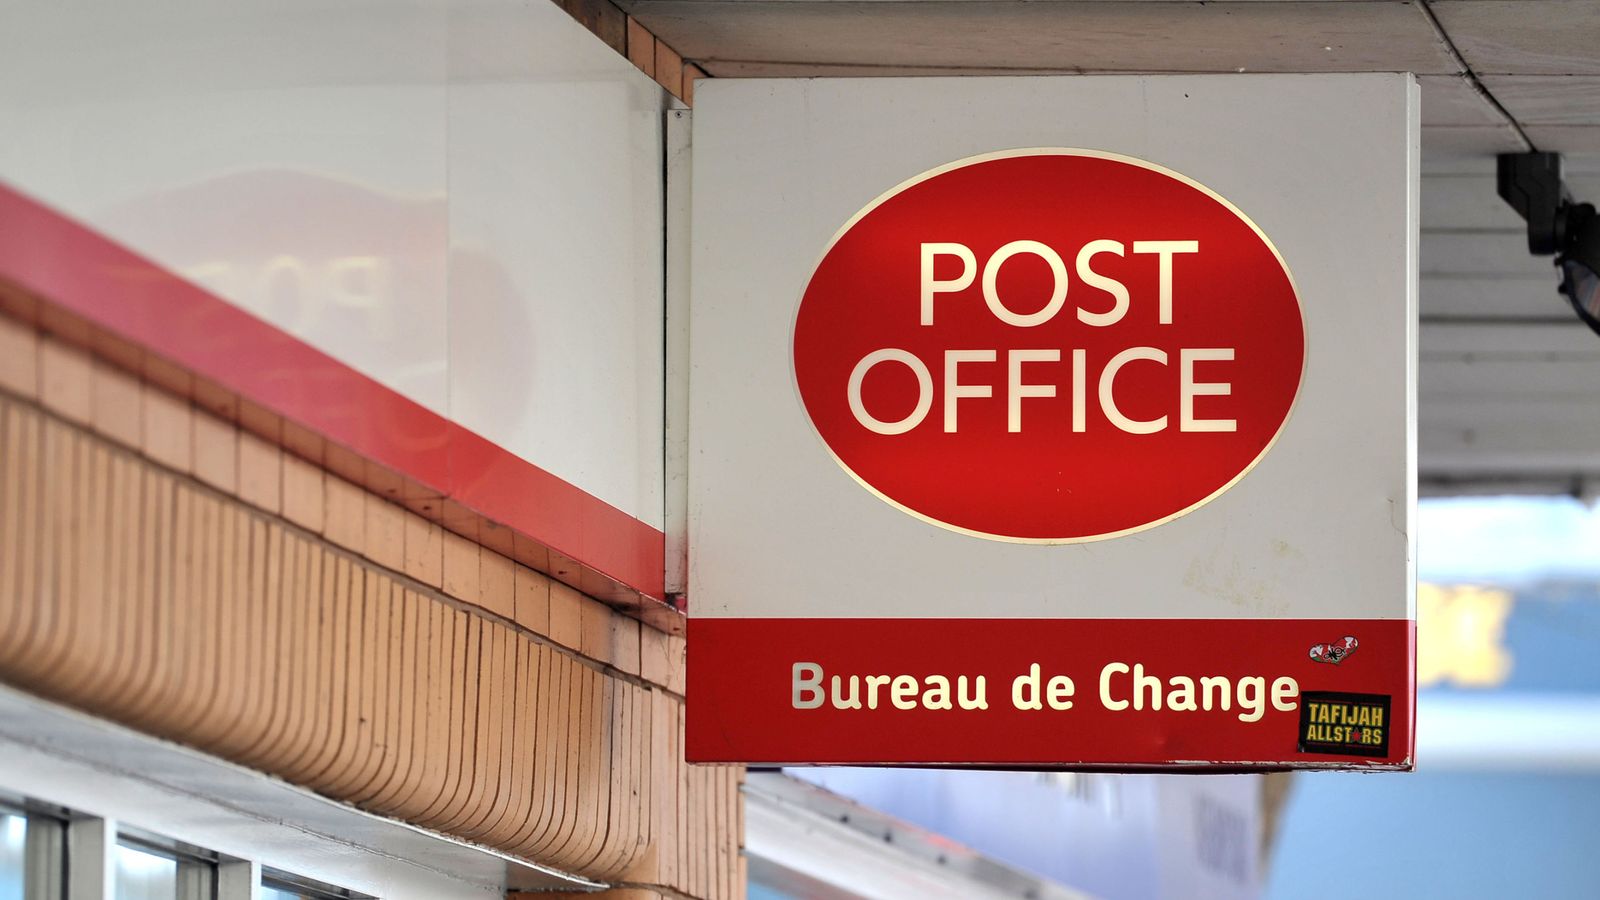 Failures in scandal-hit Post Office IT system were raised to Tony Blair's government, inquiry hears